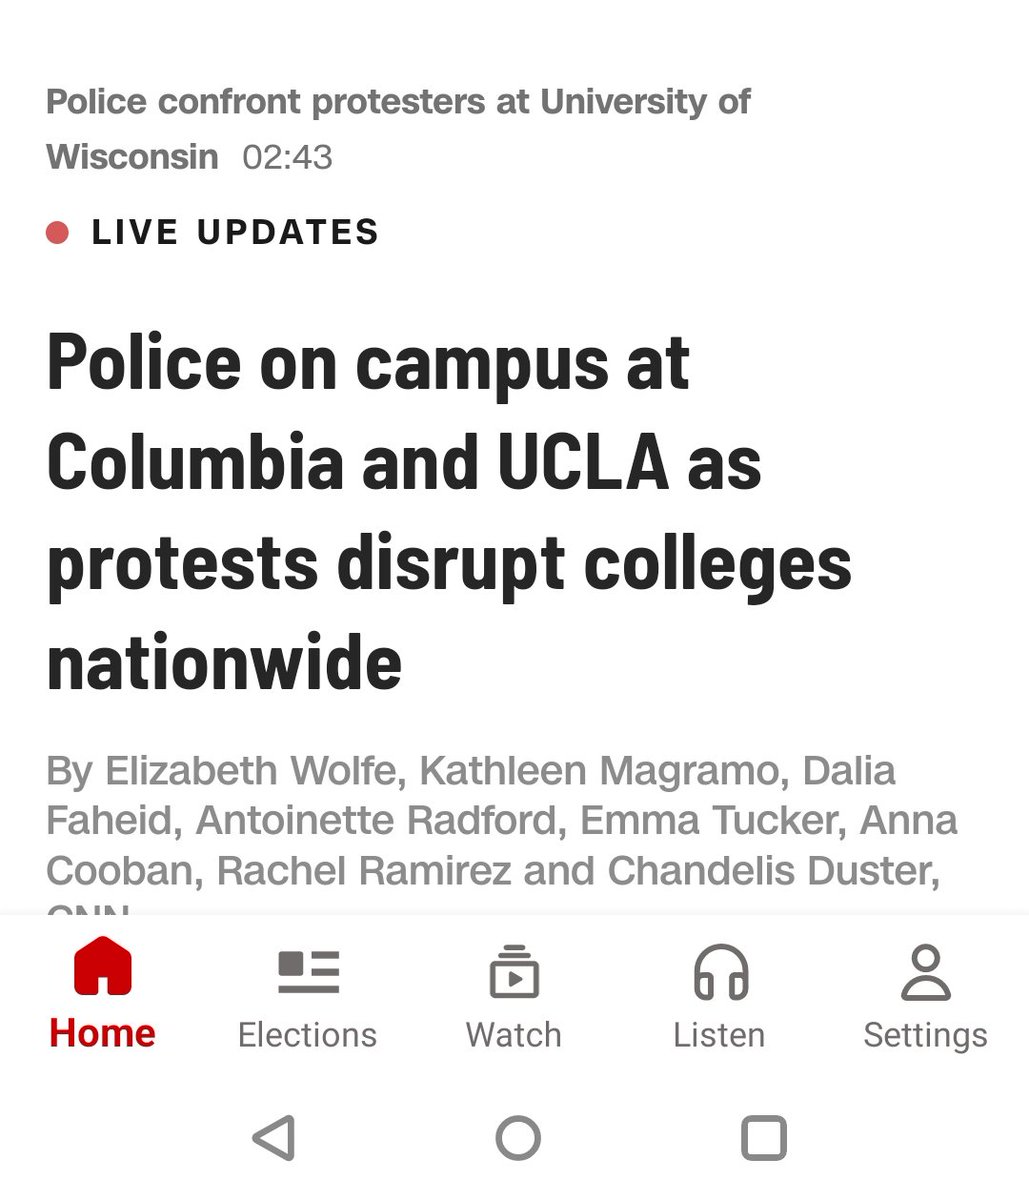 When you start breaking shit to occupy a closed building, you've gone too far. But as for nonviolent protesters, the 1st Amendment needs to be respected. Fuck this 'shut them up' shit!